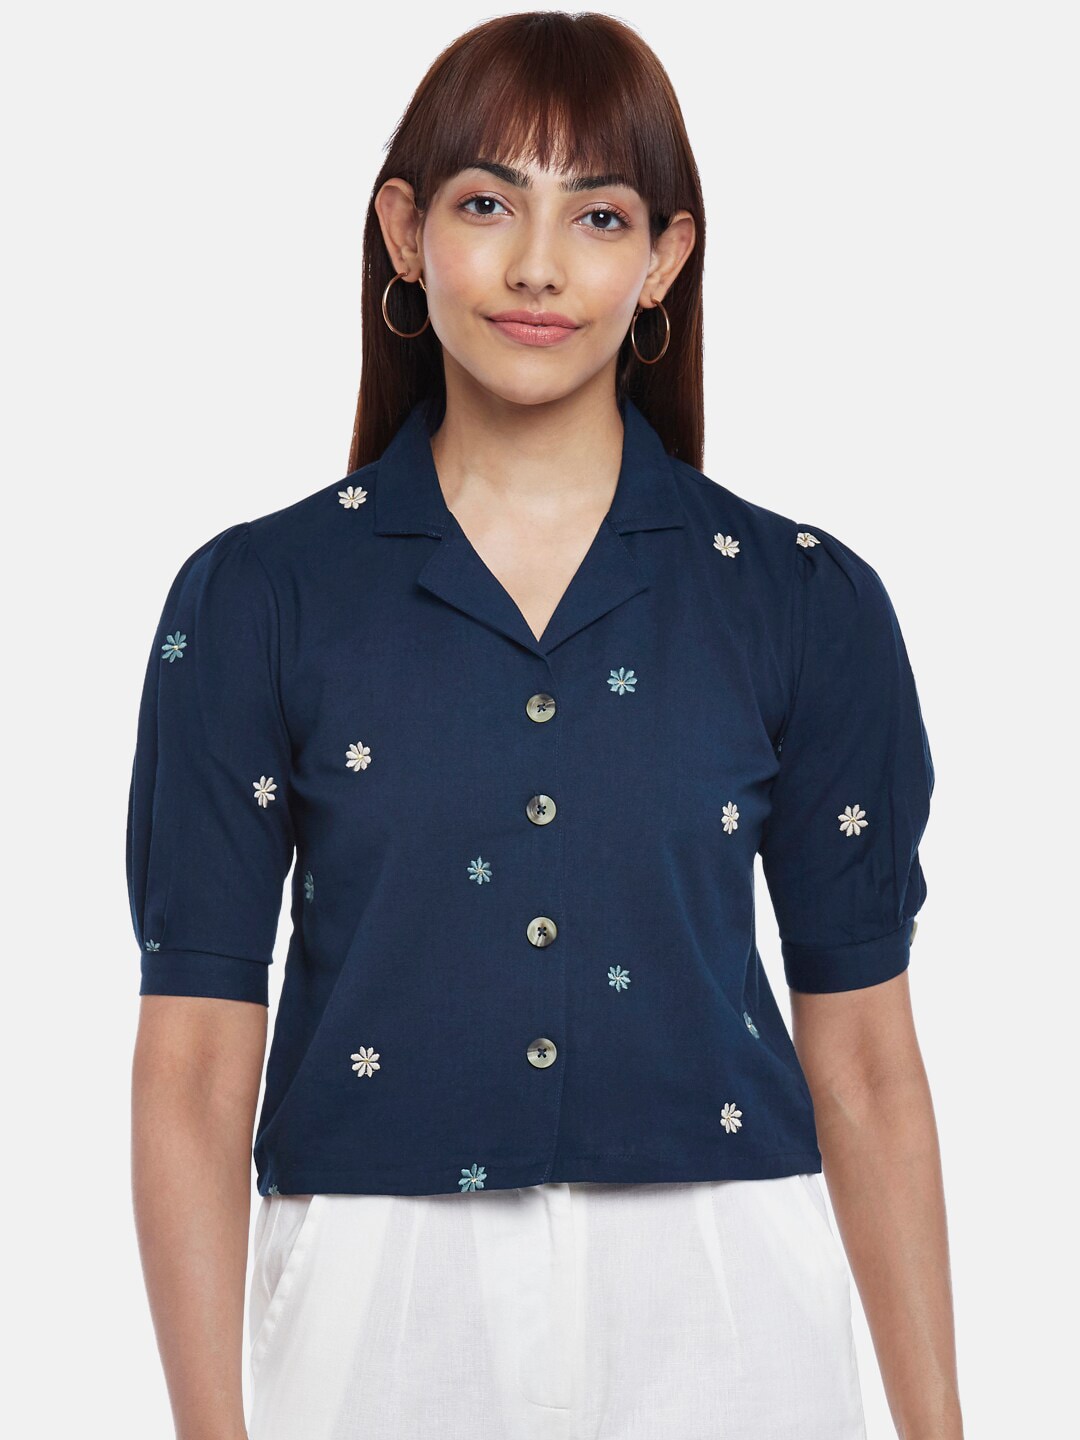 AKKRITI BY PANTALOONS Blue Shirt Style Top Price in India